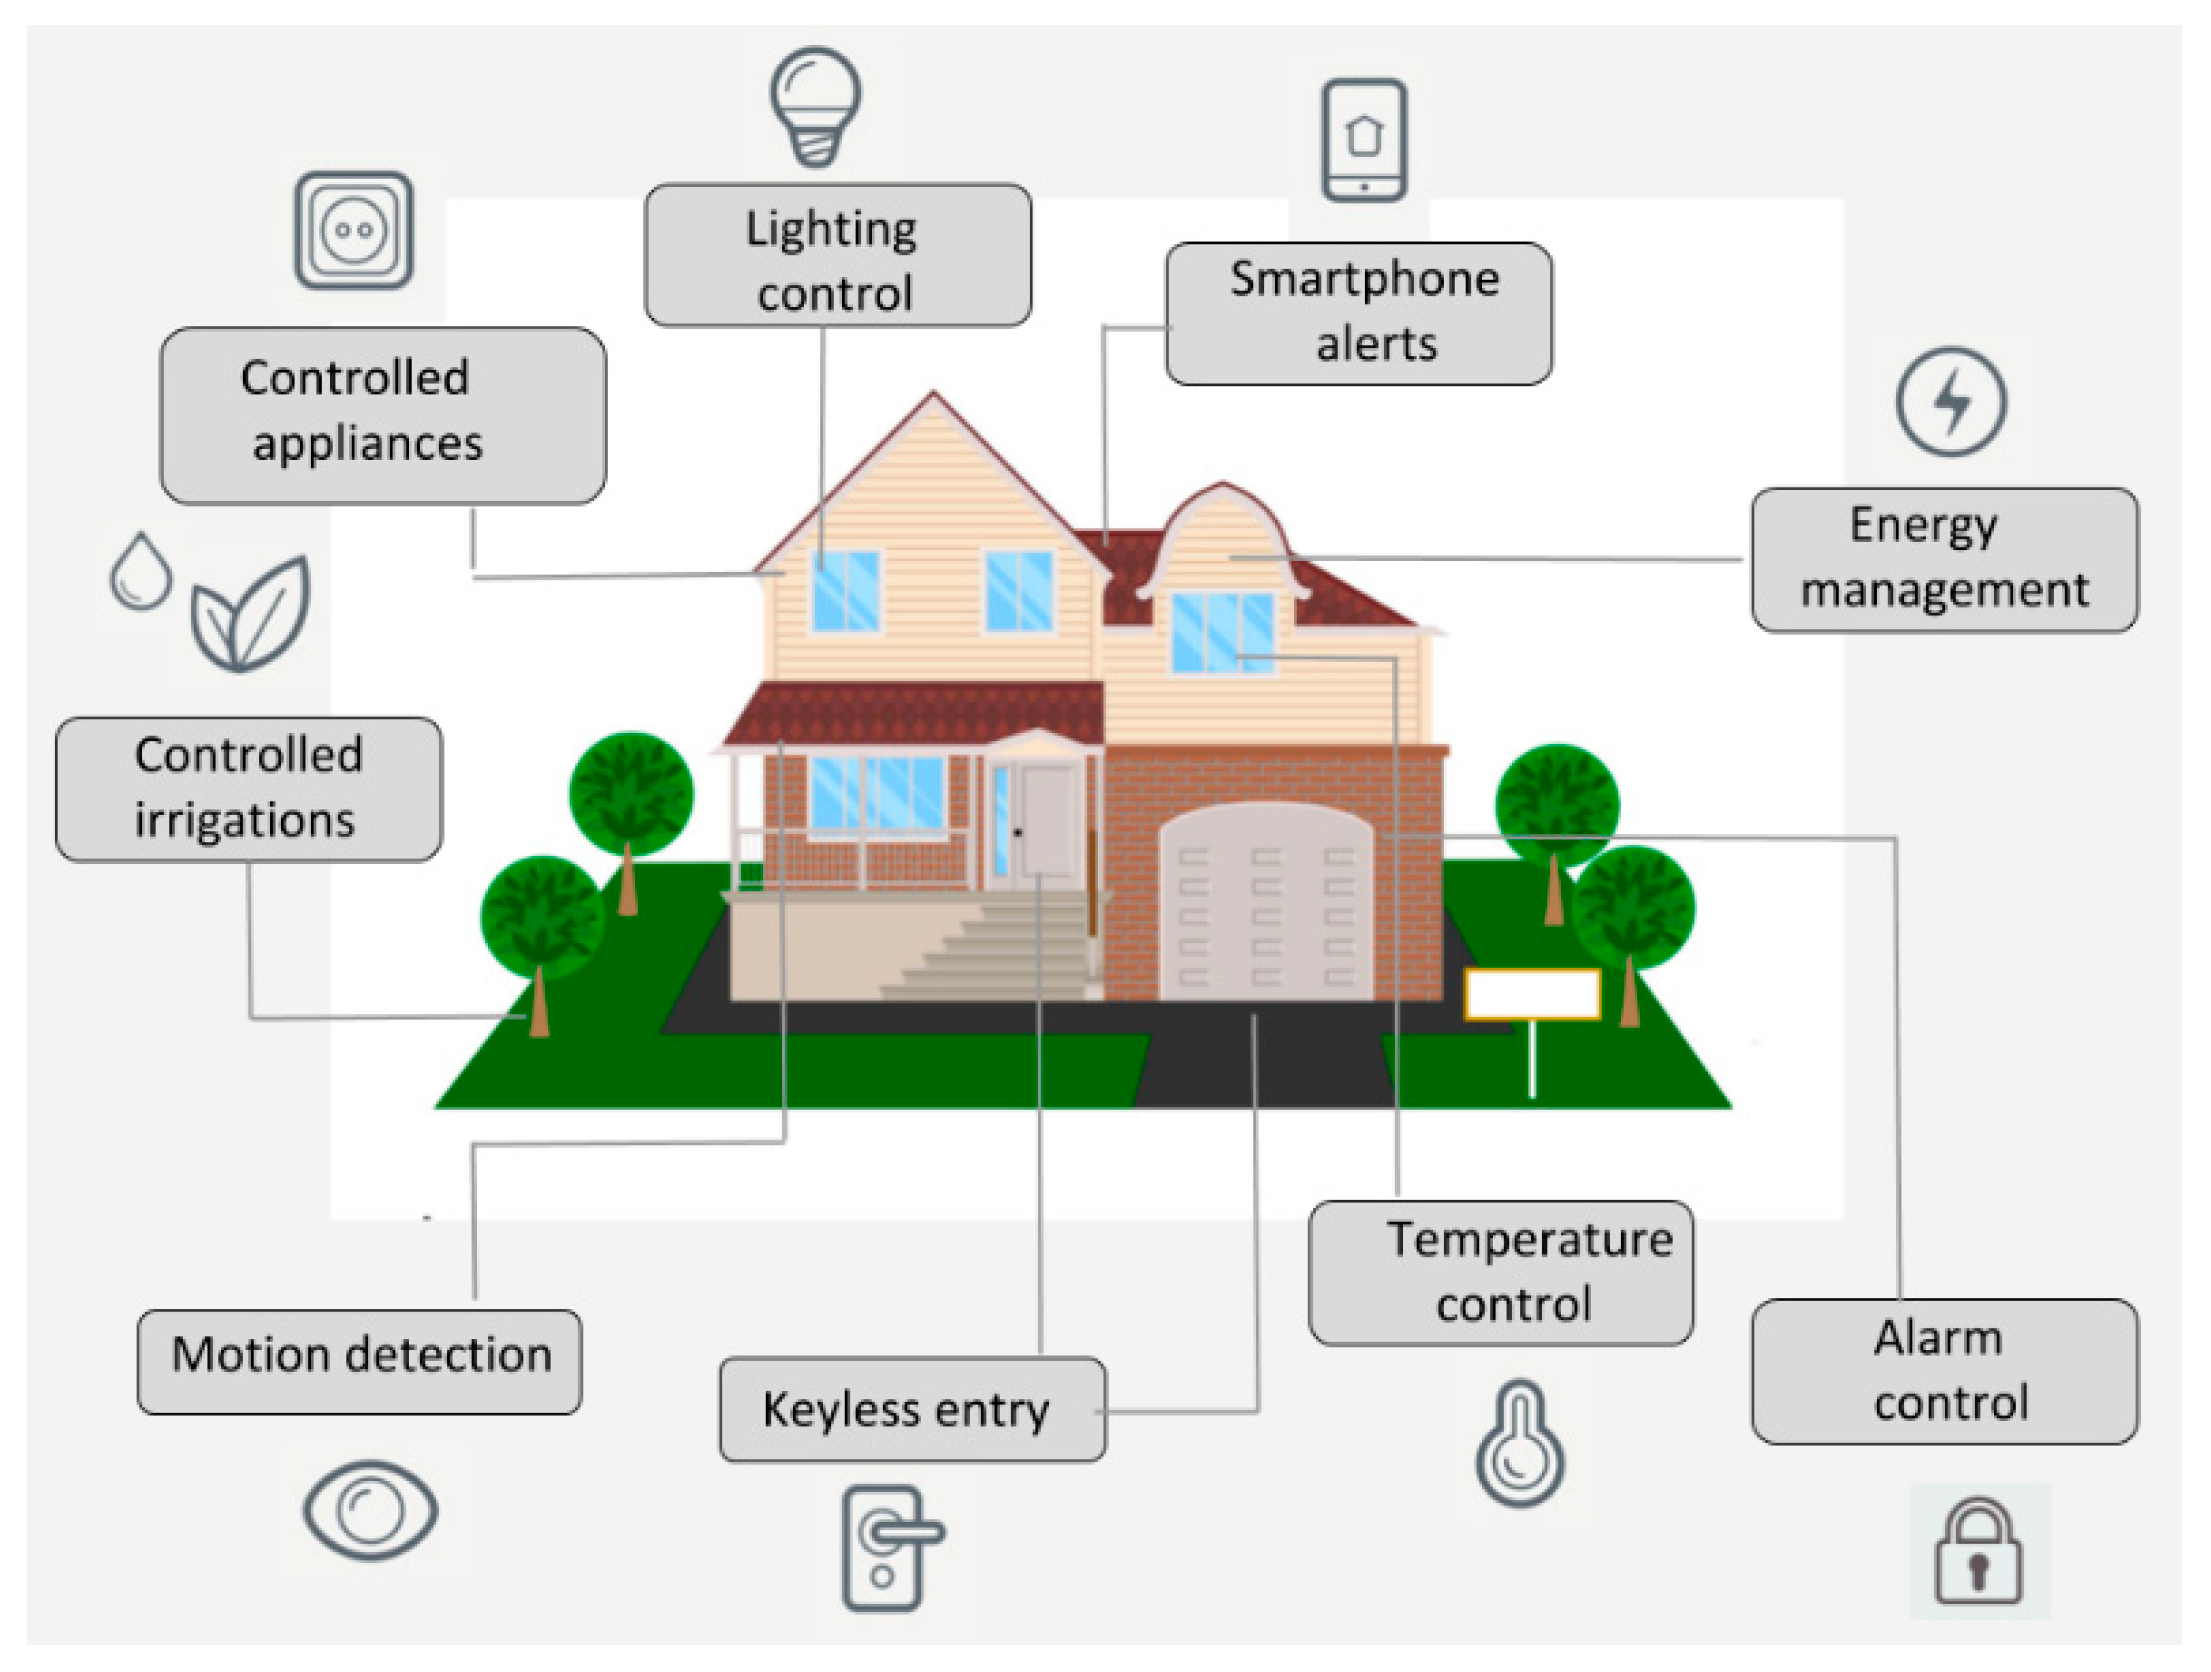 Sensors | Free Full-Text | An IoT-Based Smart Home Automation System | HTML